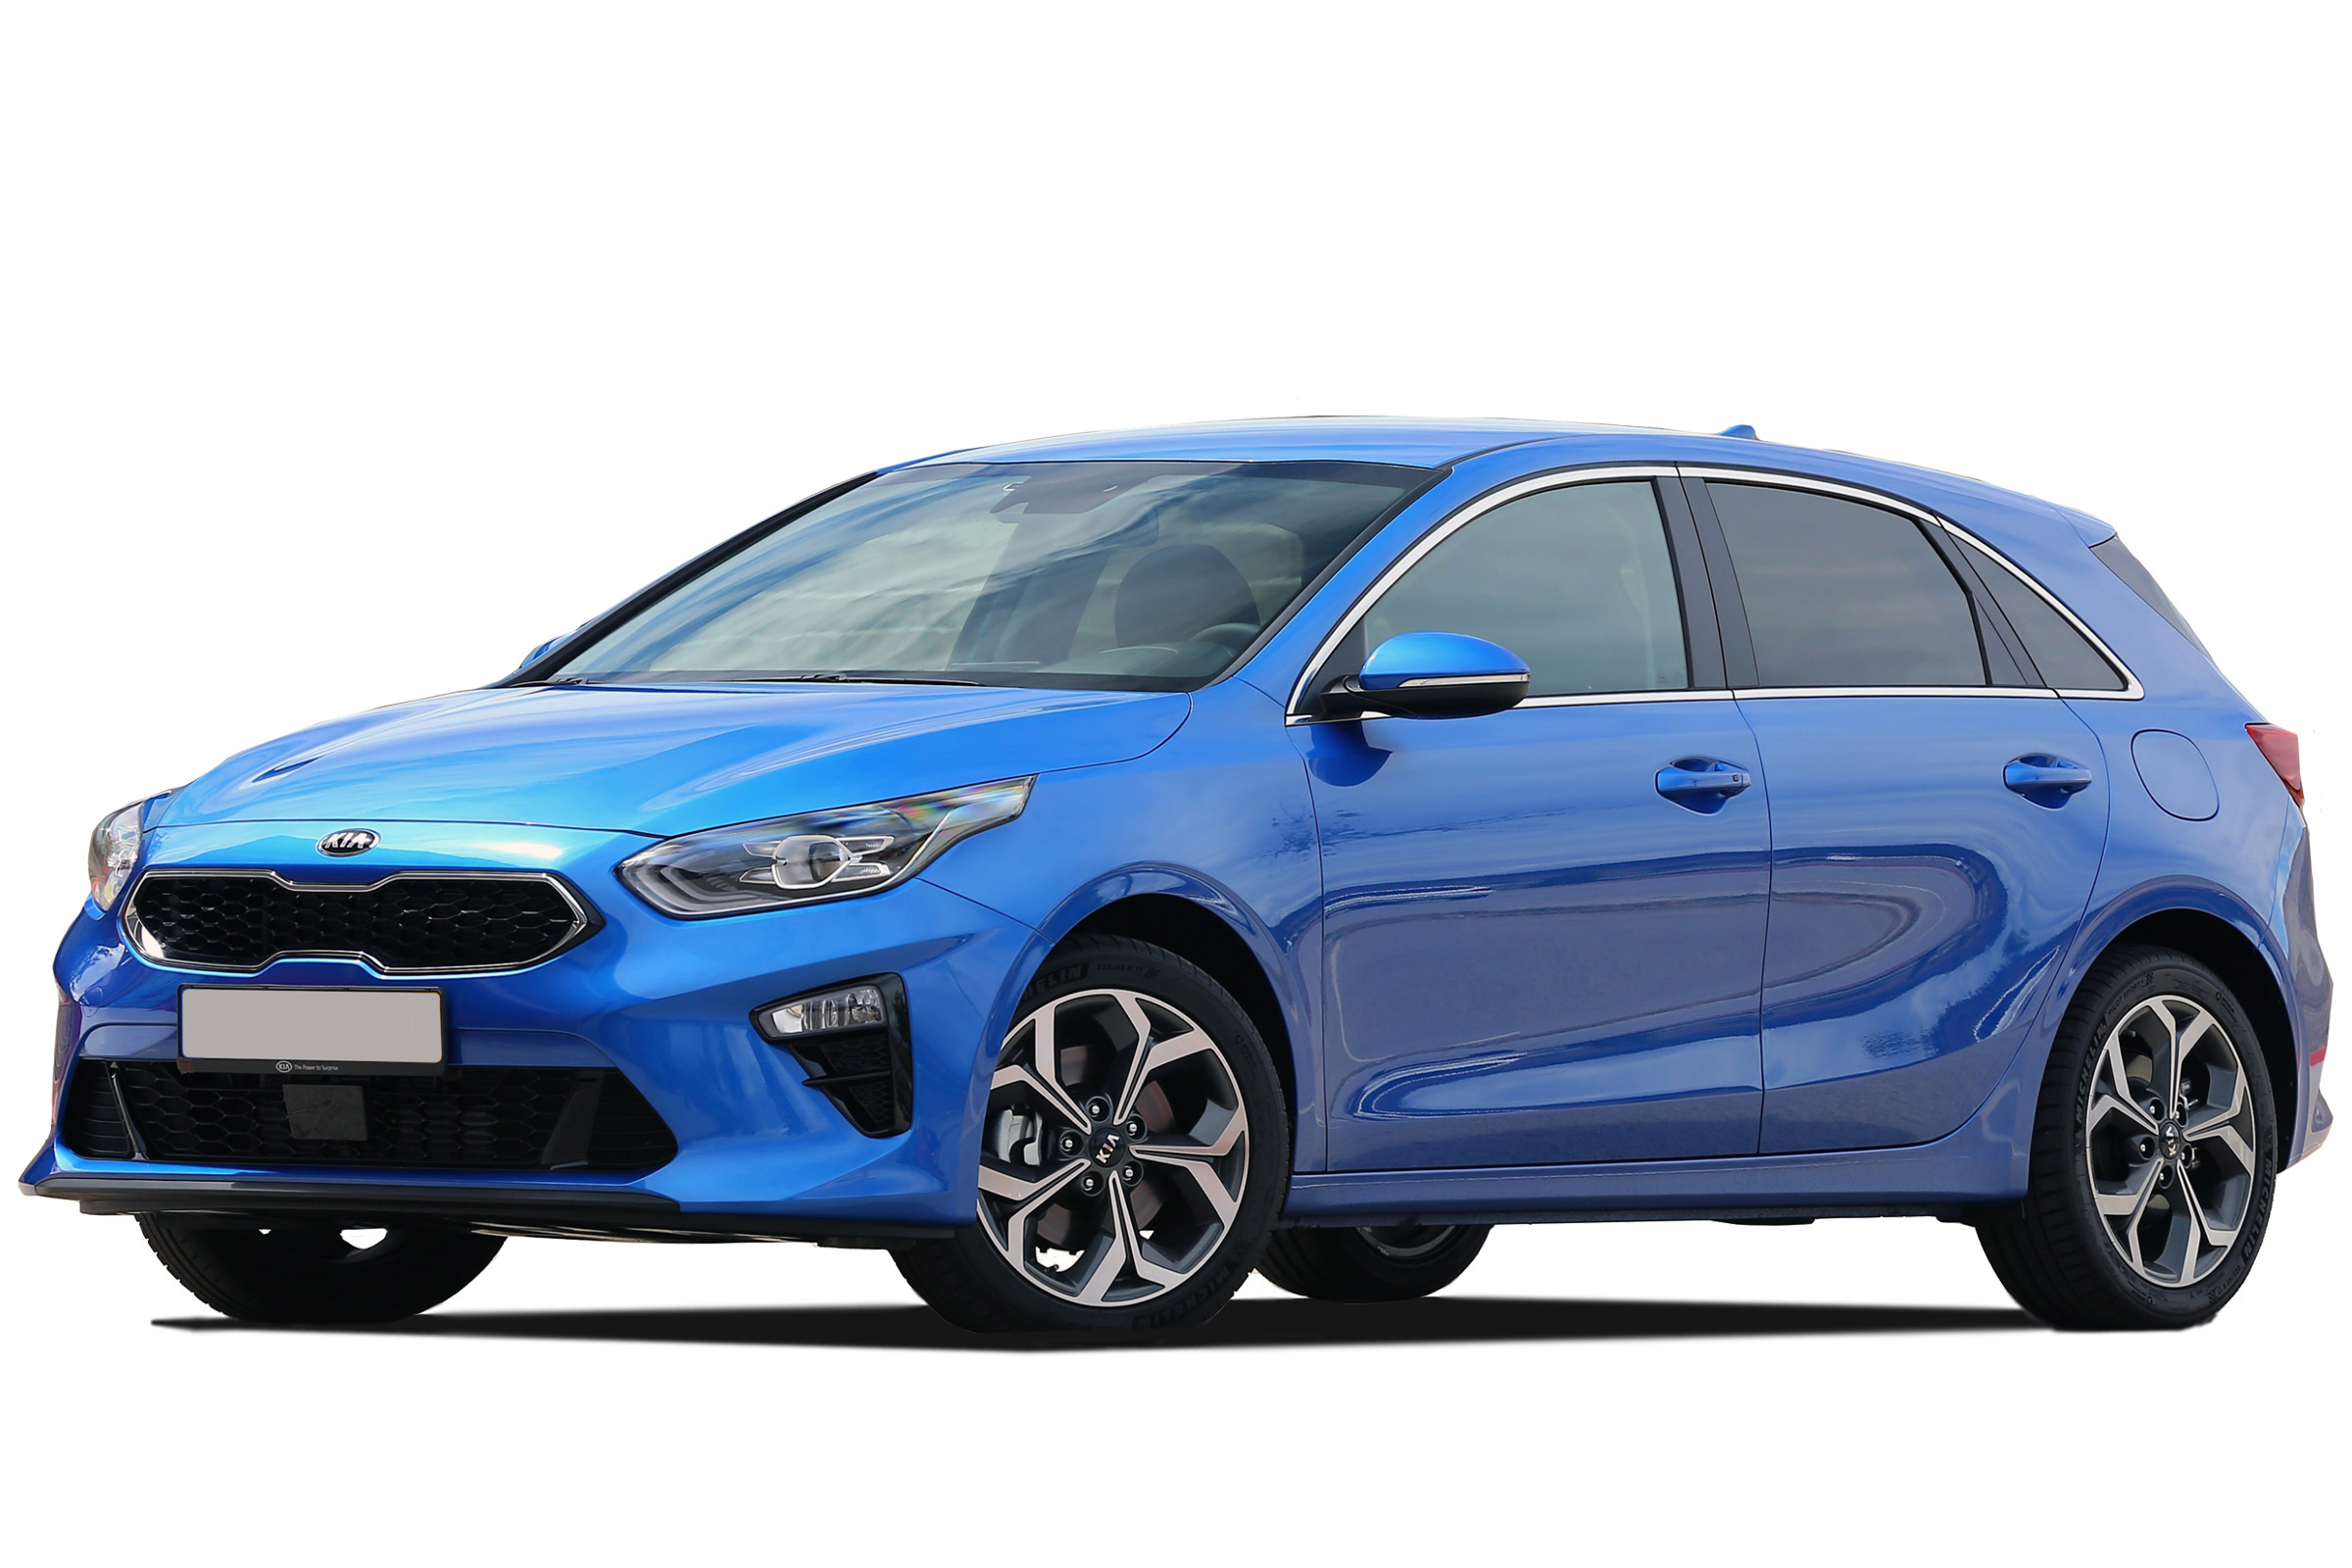 kia-ceed-hatchback-practicality-boot-space-2020-review-carbuyer